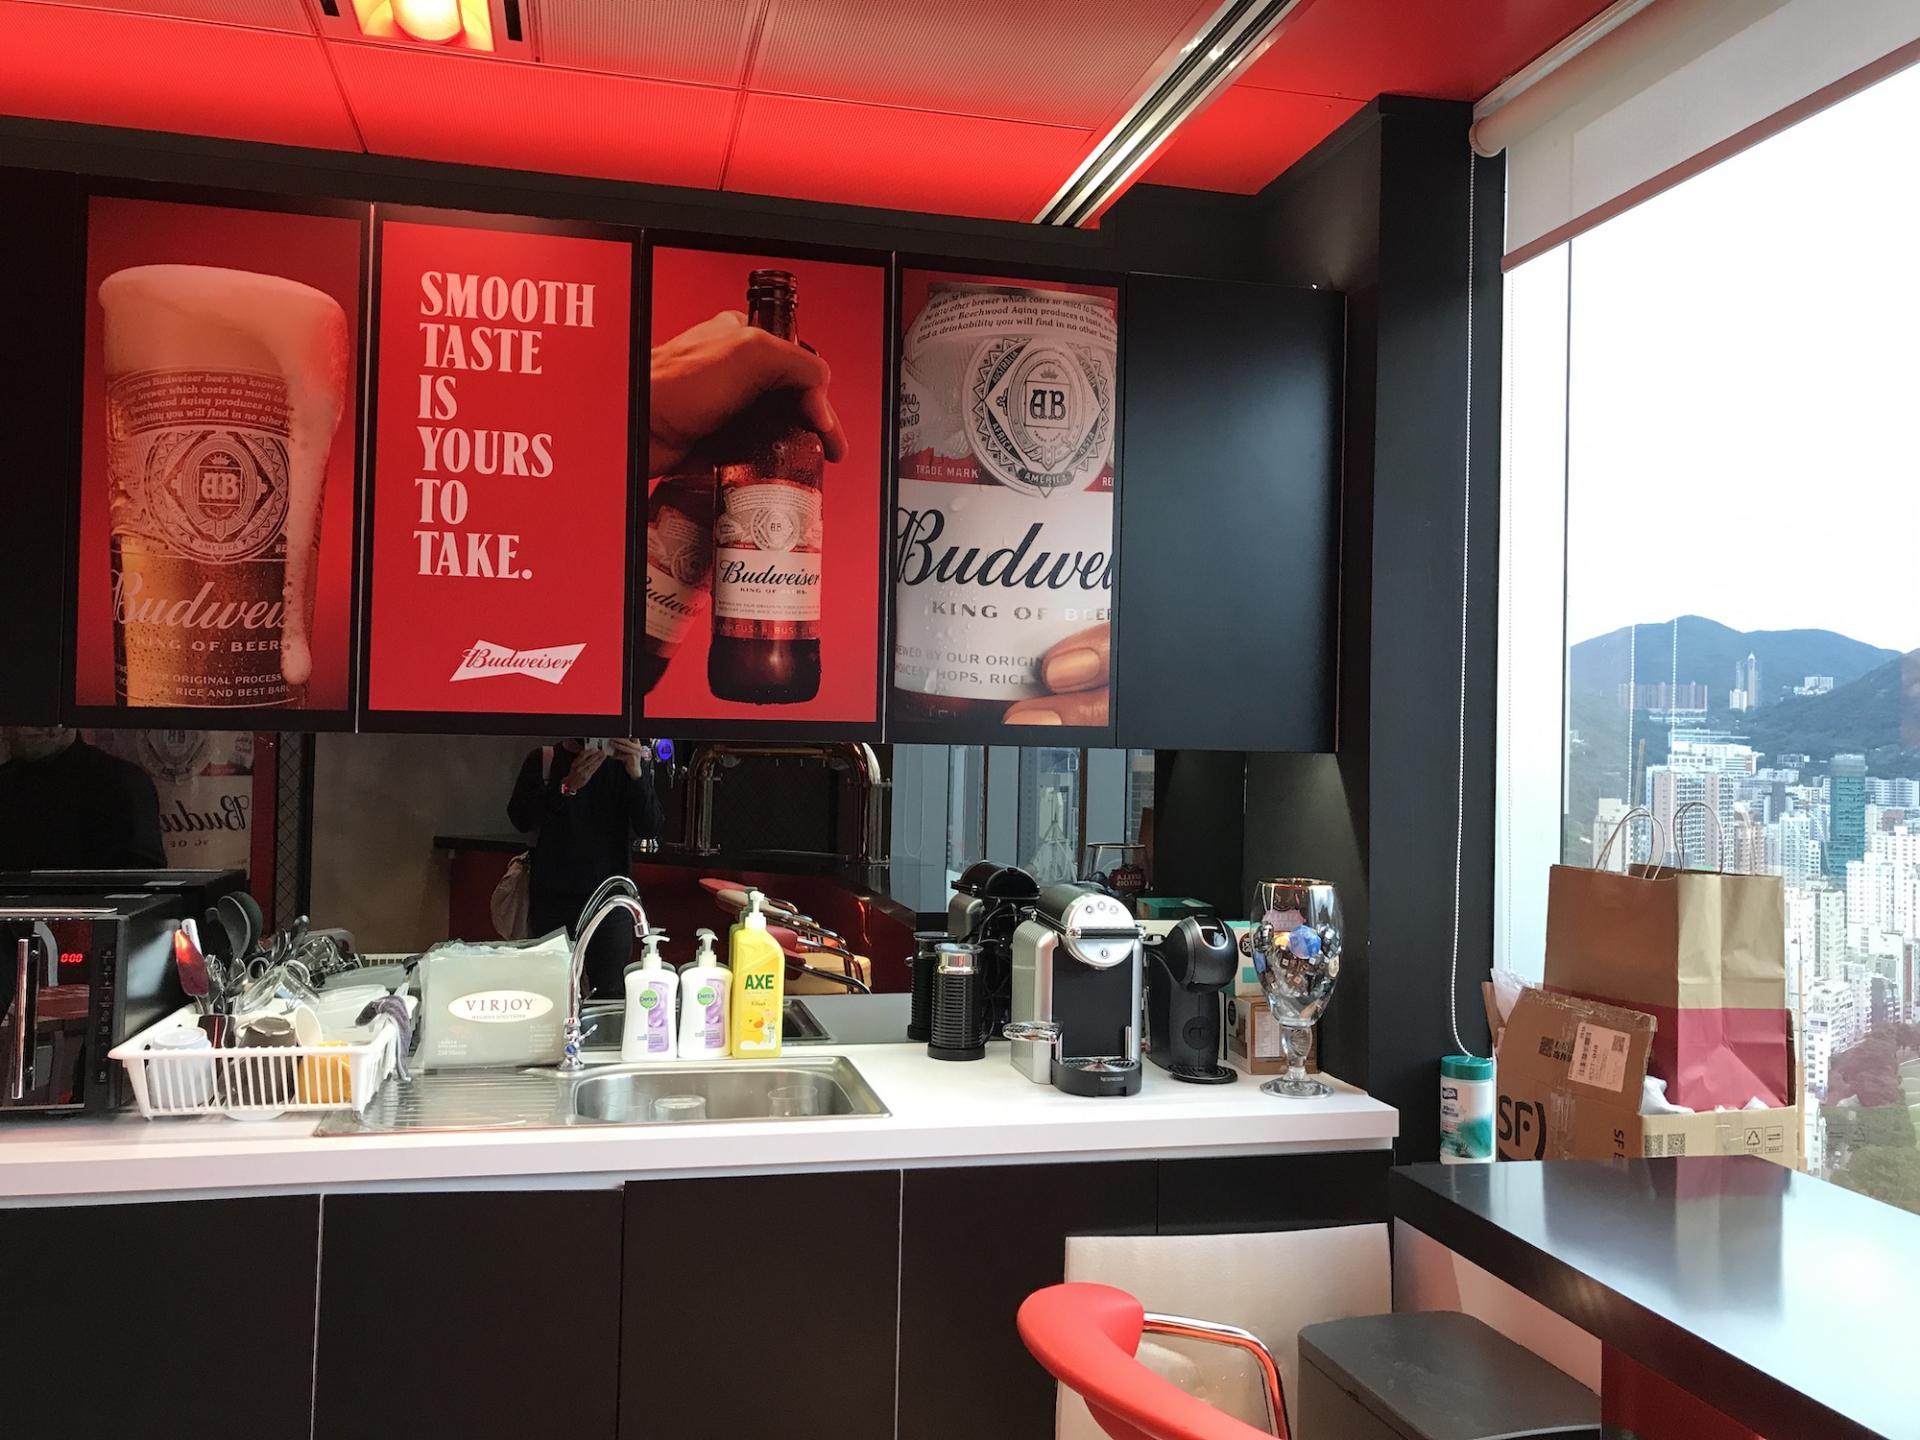 This office pantry in Causeway Bay looks like an American-style bar